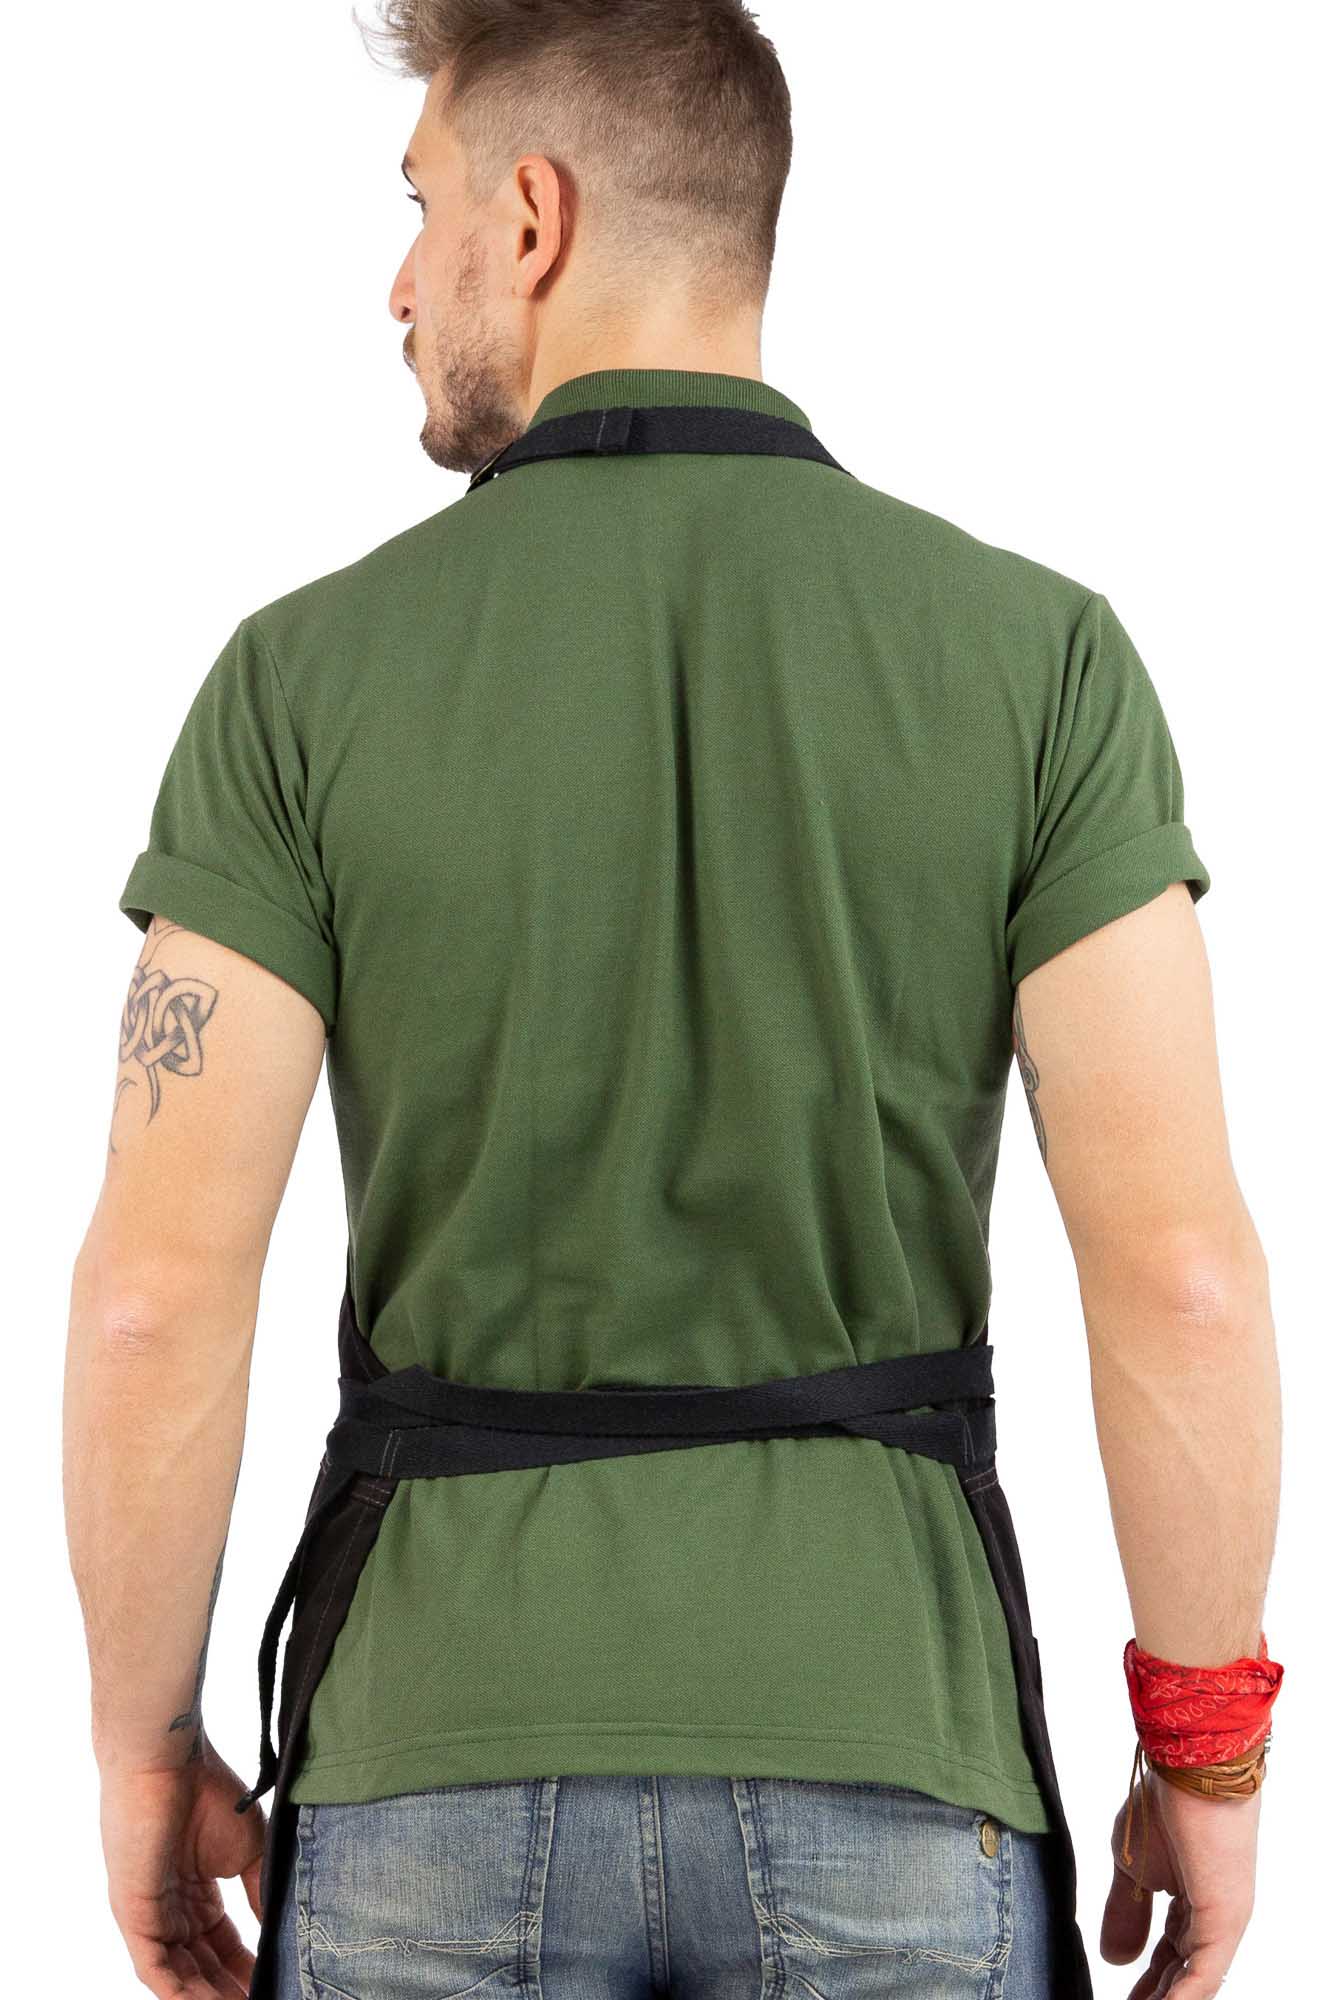 Barista Apron Leather Straps & Loops Good for Chef, Barista, Bartender Black Twill - Black Leather